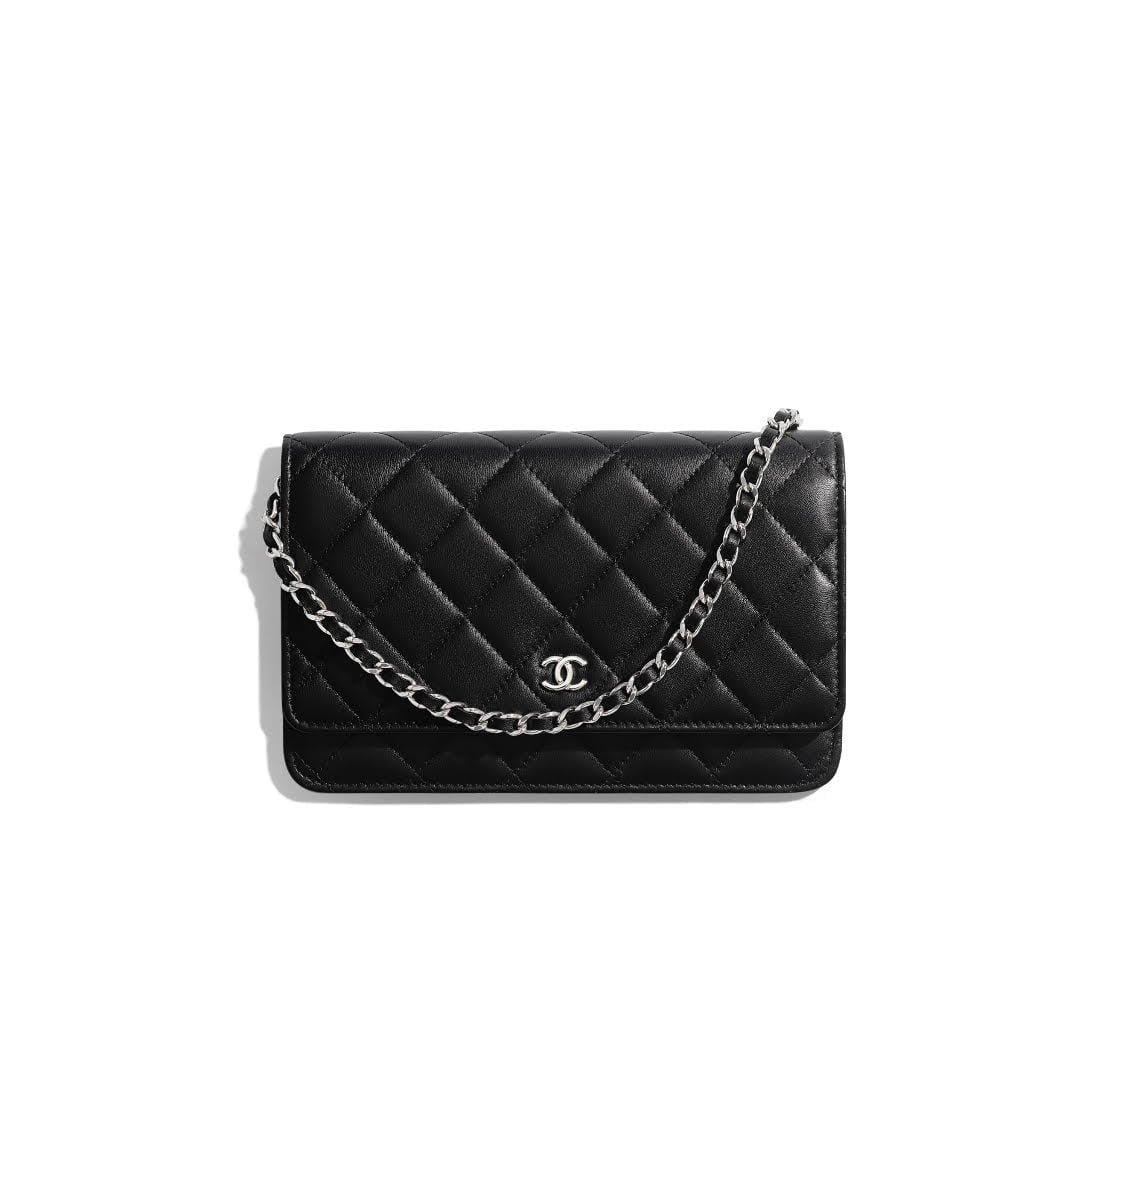 Why the WOC Will Never Go Out of Style  Chain crossbody bag, Félicie  pochette, Louis vuitton felicie pochette